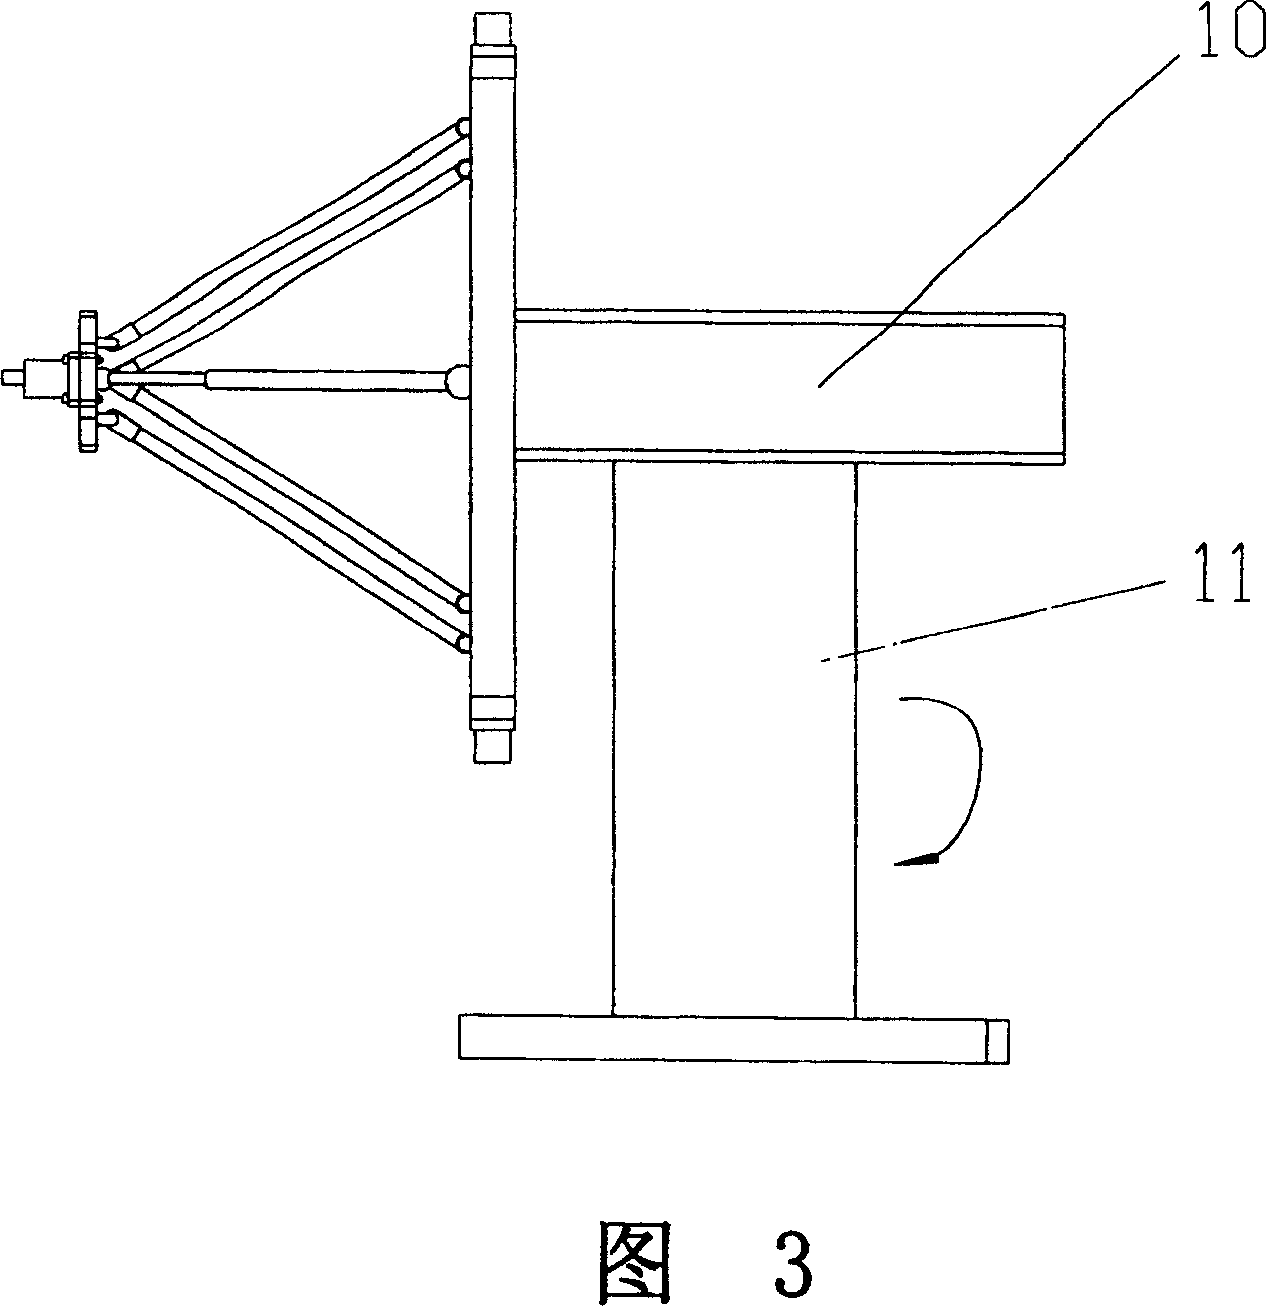 Two-freedom parallel-connecting mechanism with passive constrained branch